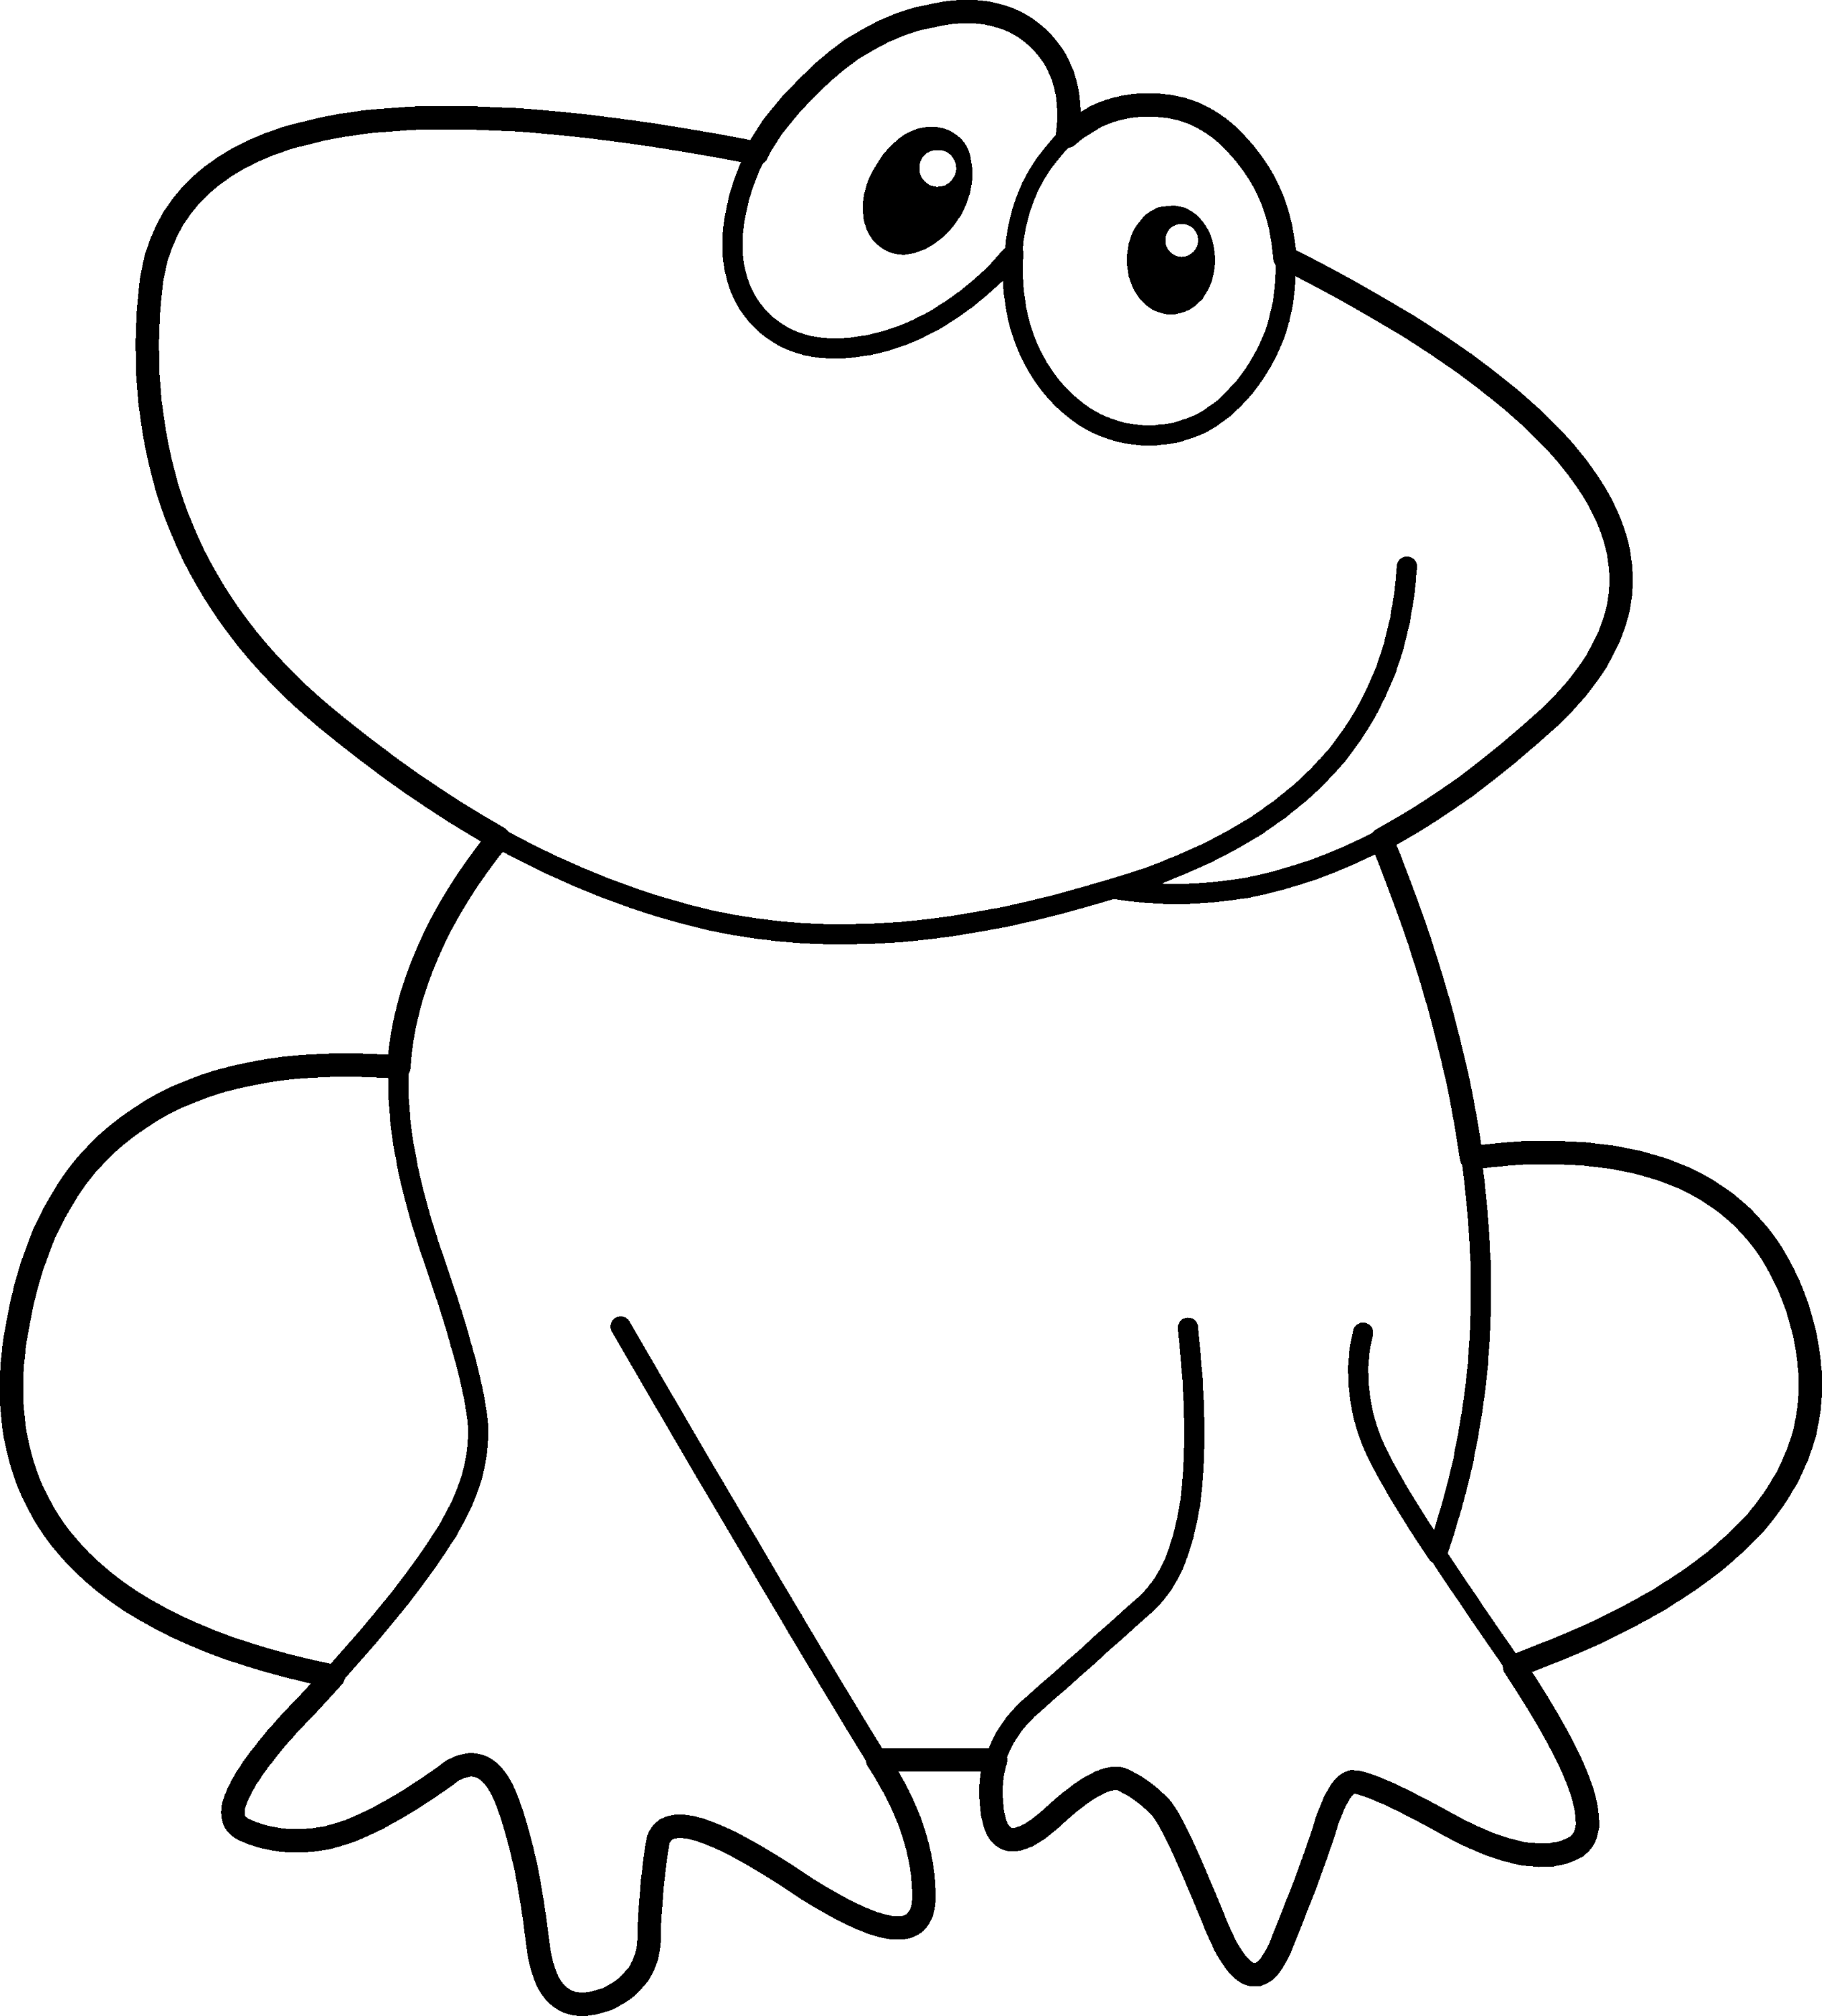 Frog Clip Art Coloring Page